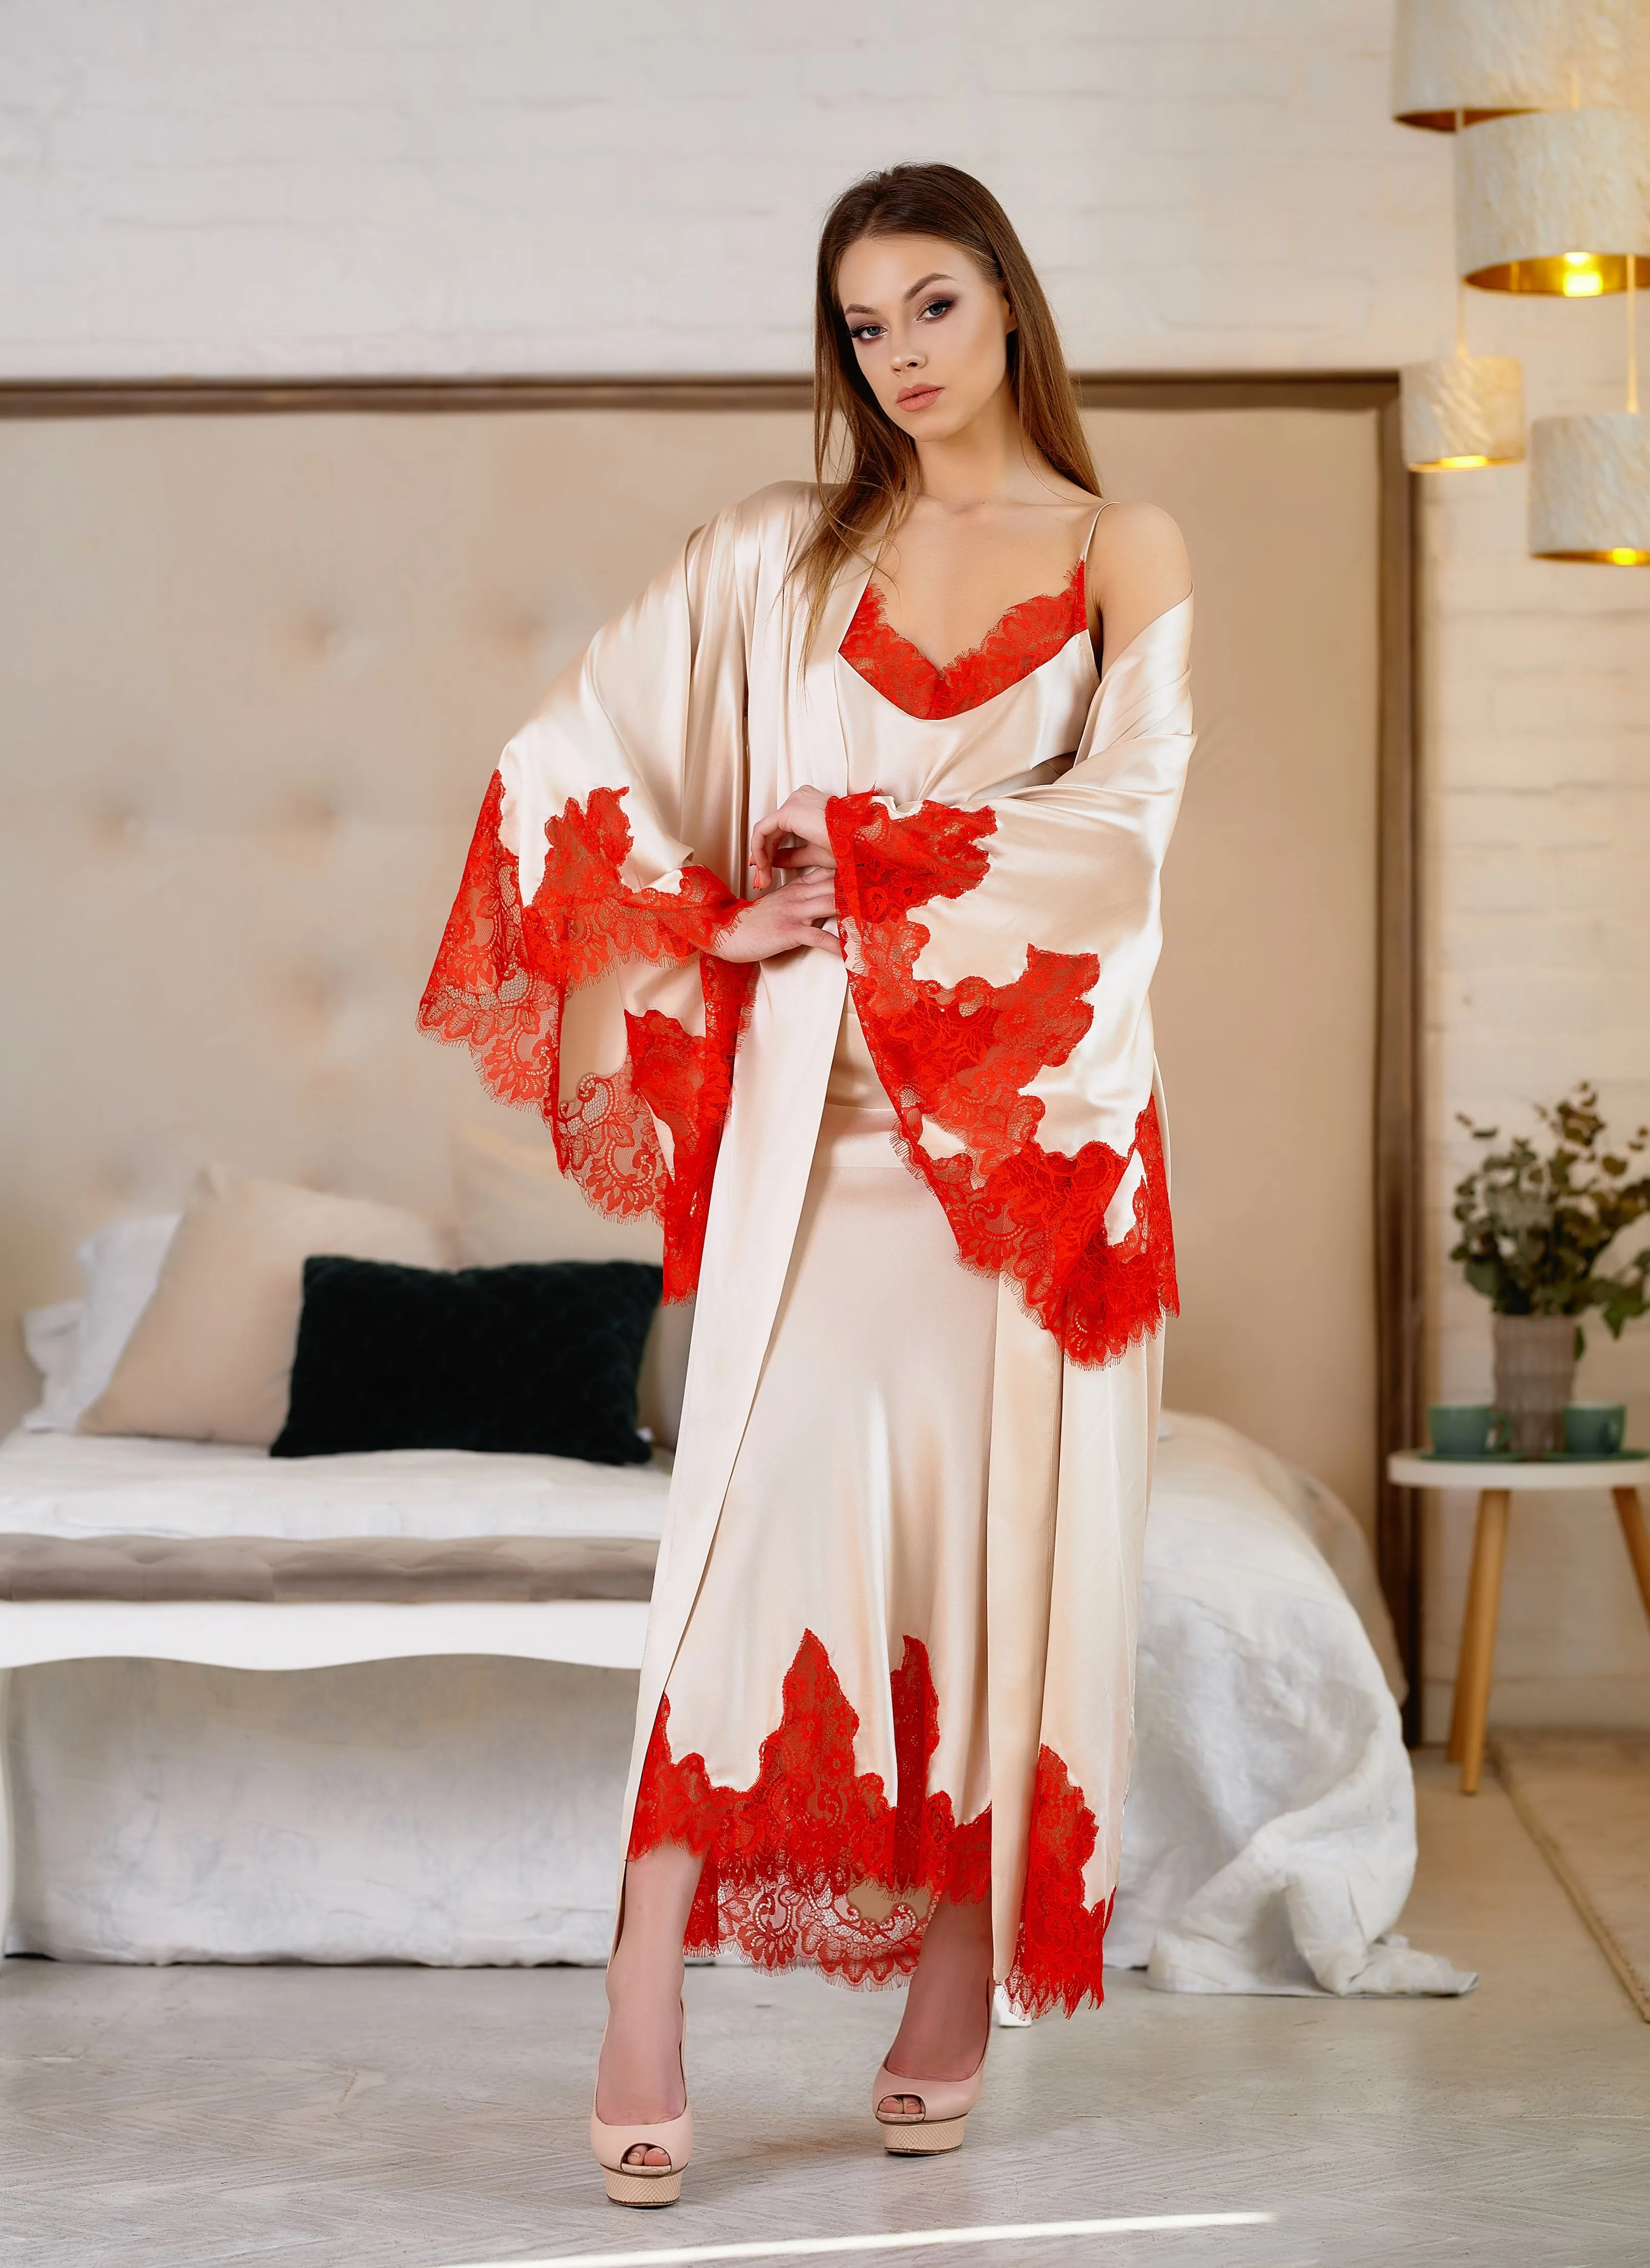 Luxury Lace Bridal Bathrobe Set Full Length Lingerie Nightgown And Pajamas  For Romantic Sleepwear, Dressing Gowns, Housecoat, Nightwear And Lounge Wear  From Dressvip, $73.41